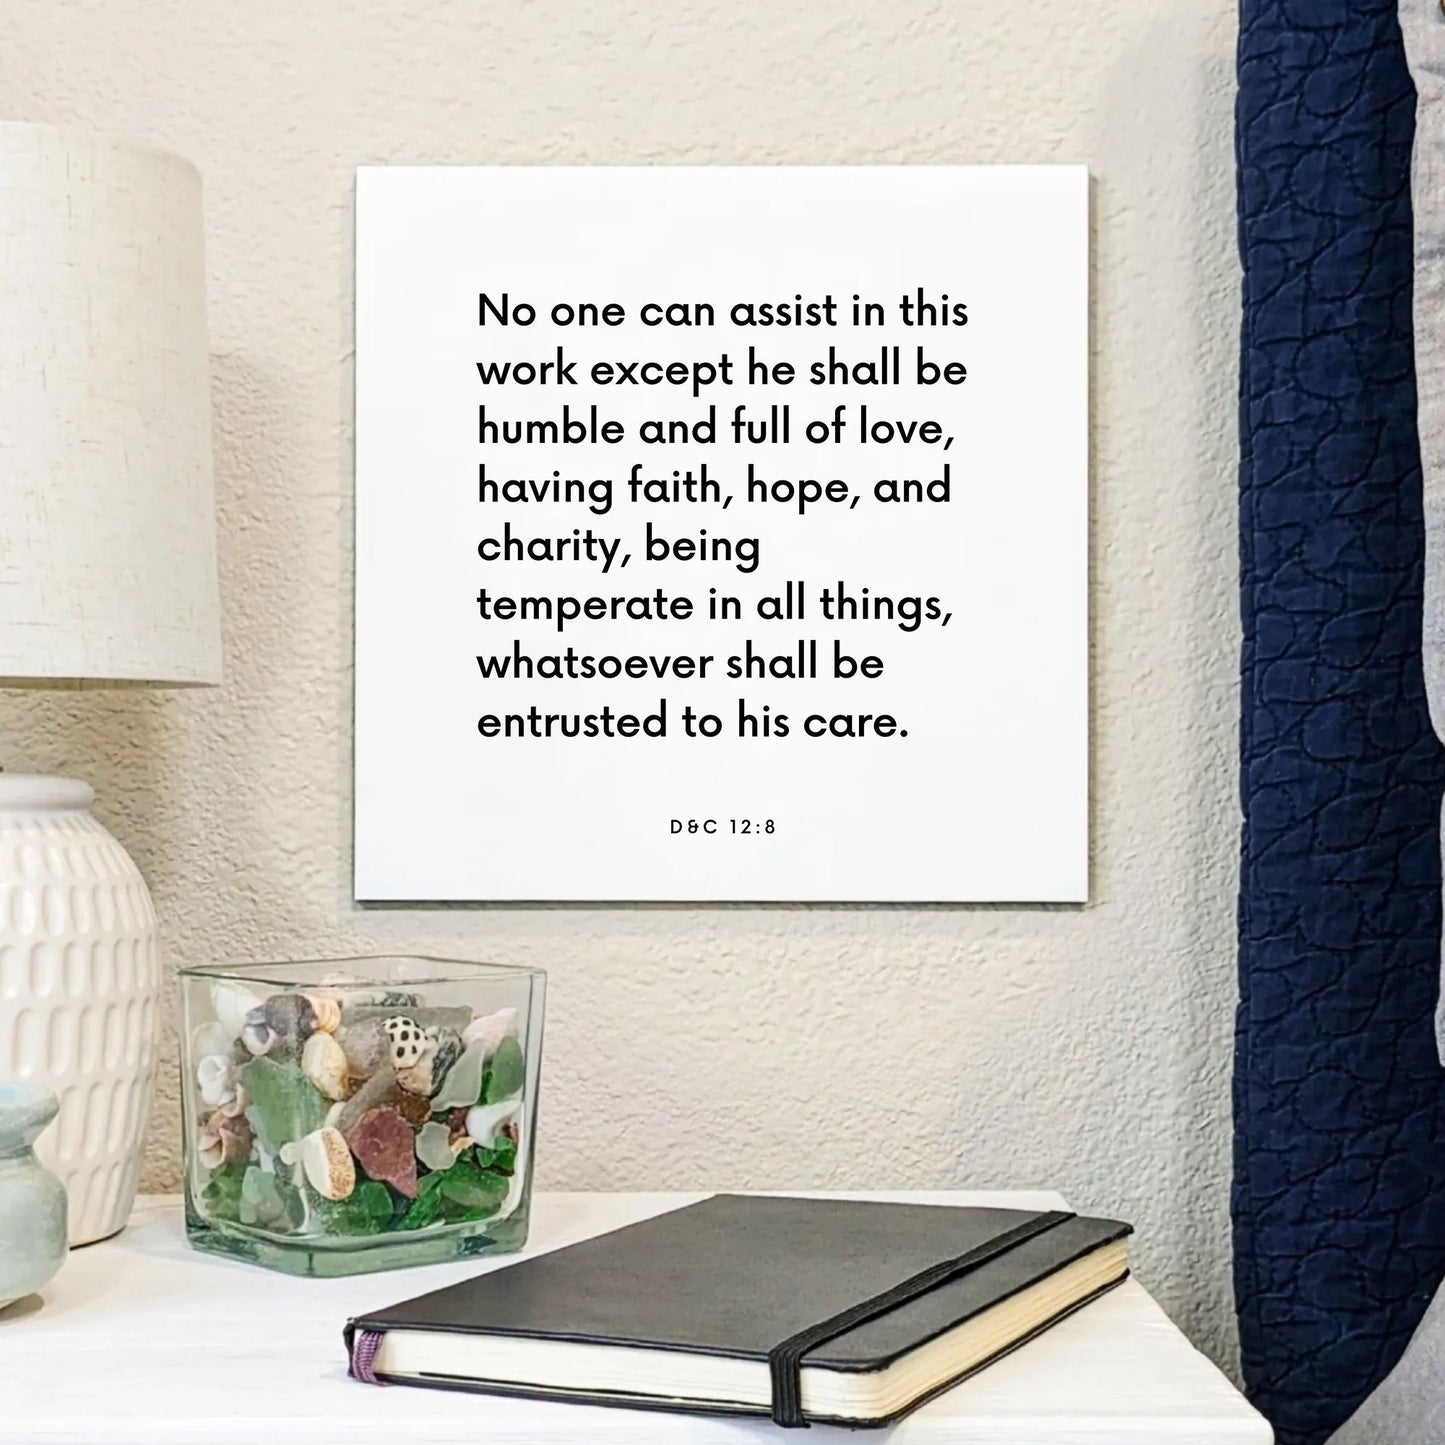 Bedside mouting of the scripture tile for D&C 12:8 - "No one can assist in this work except he shall be humble"